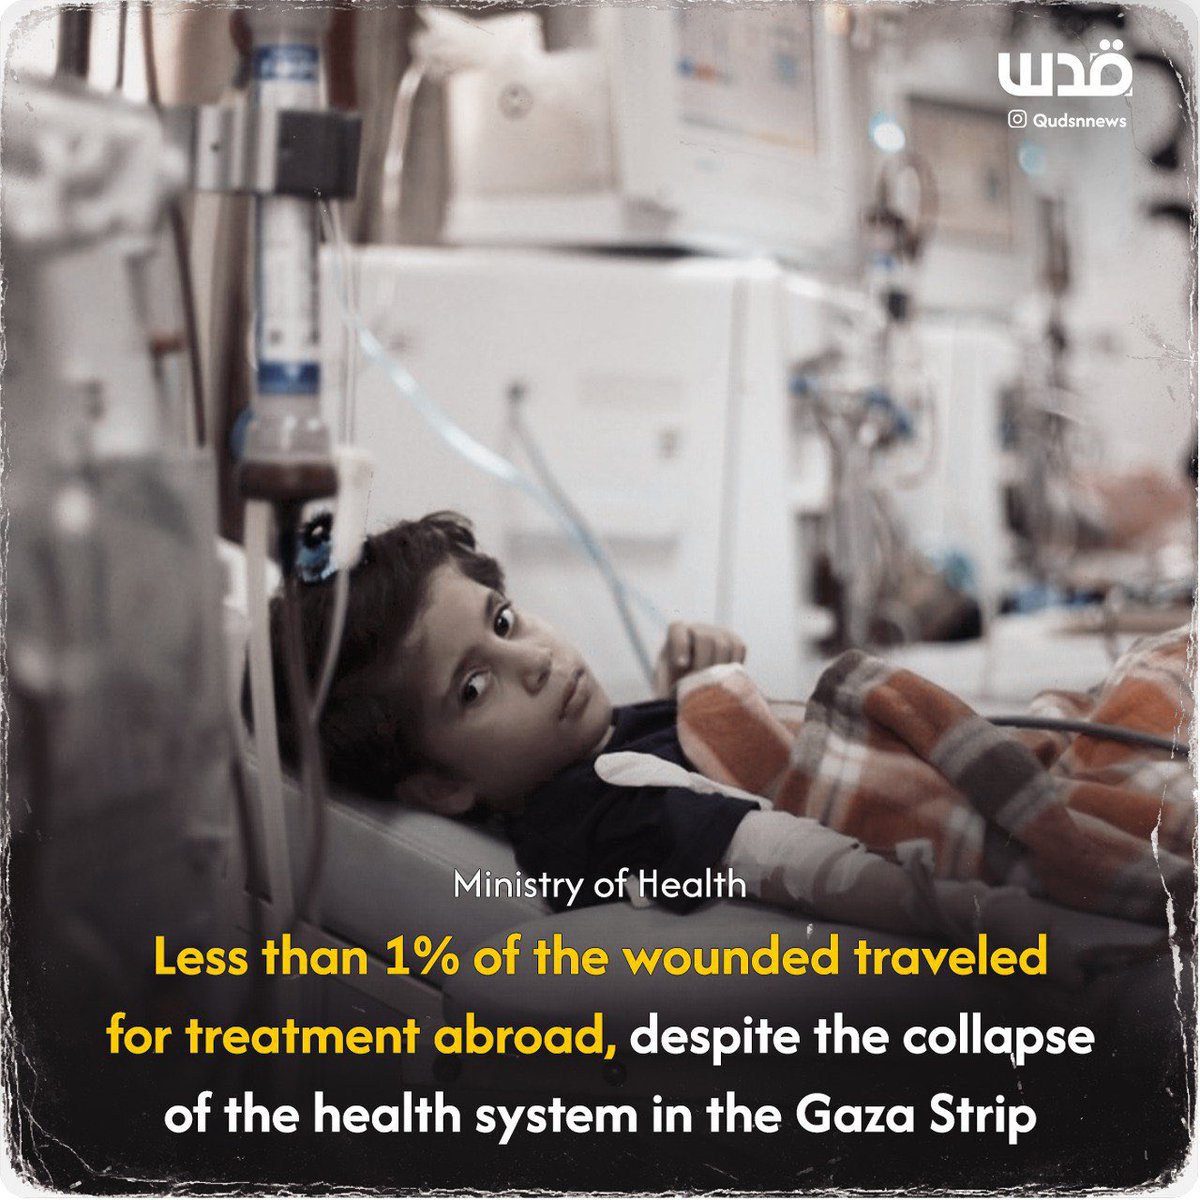 Despite the collapse of the health system in Gaza.. less than 1% of the wounded children mange to travel abroad for treatment. #inhumanity #HumanityComesFirst # #Gaza_Children_under_attack